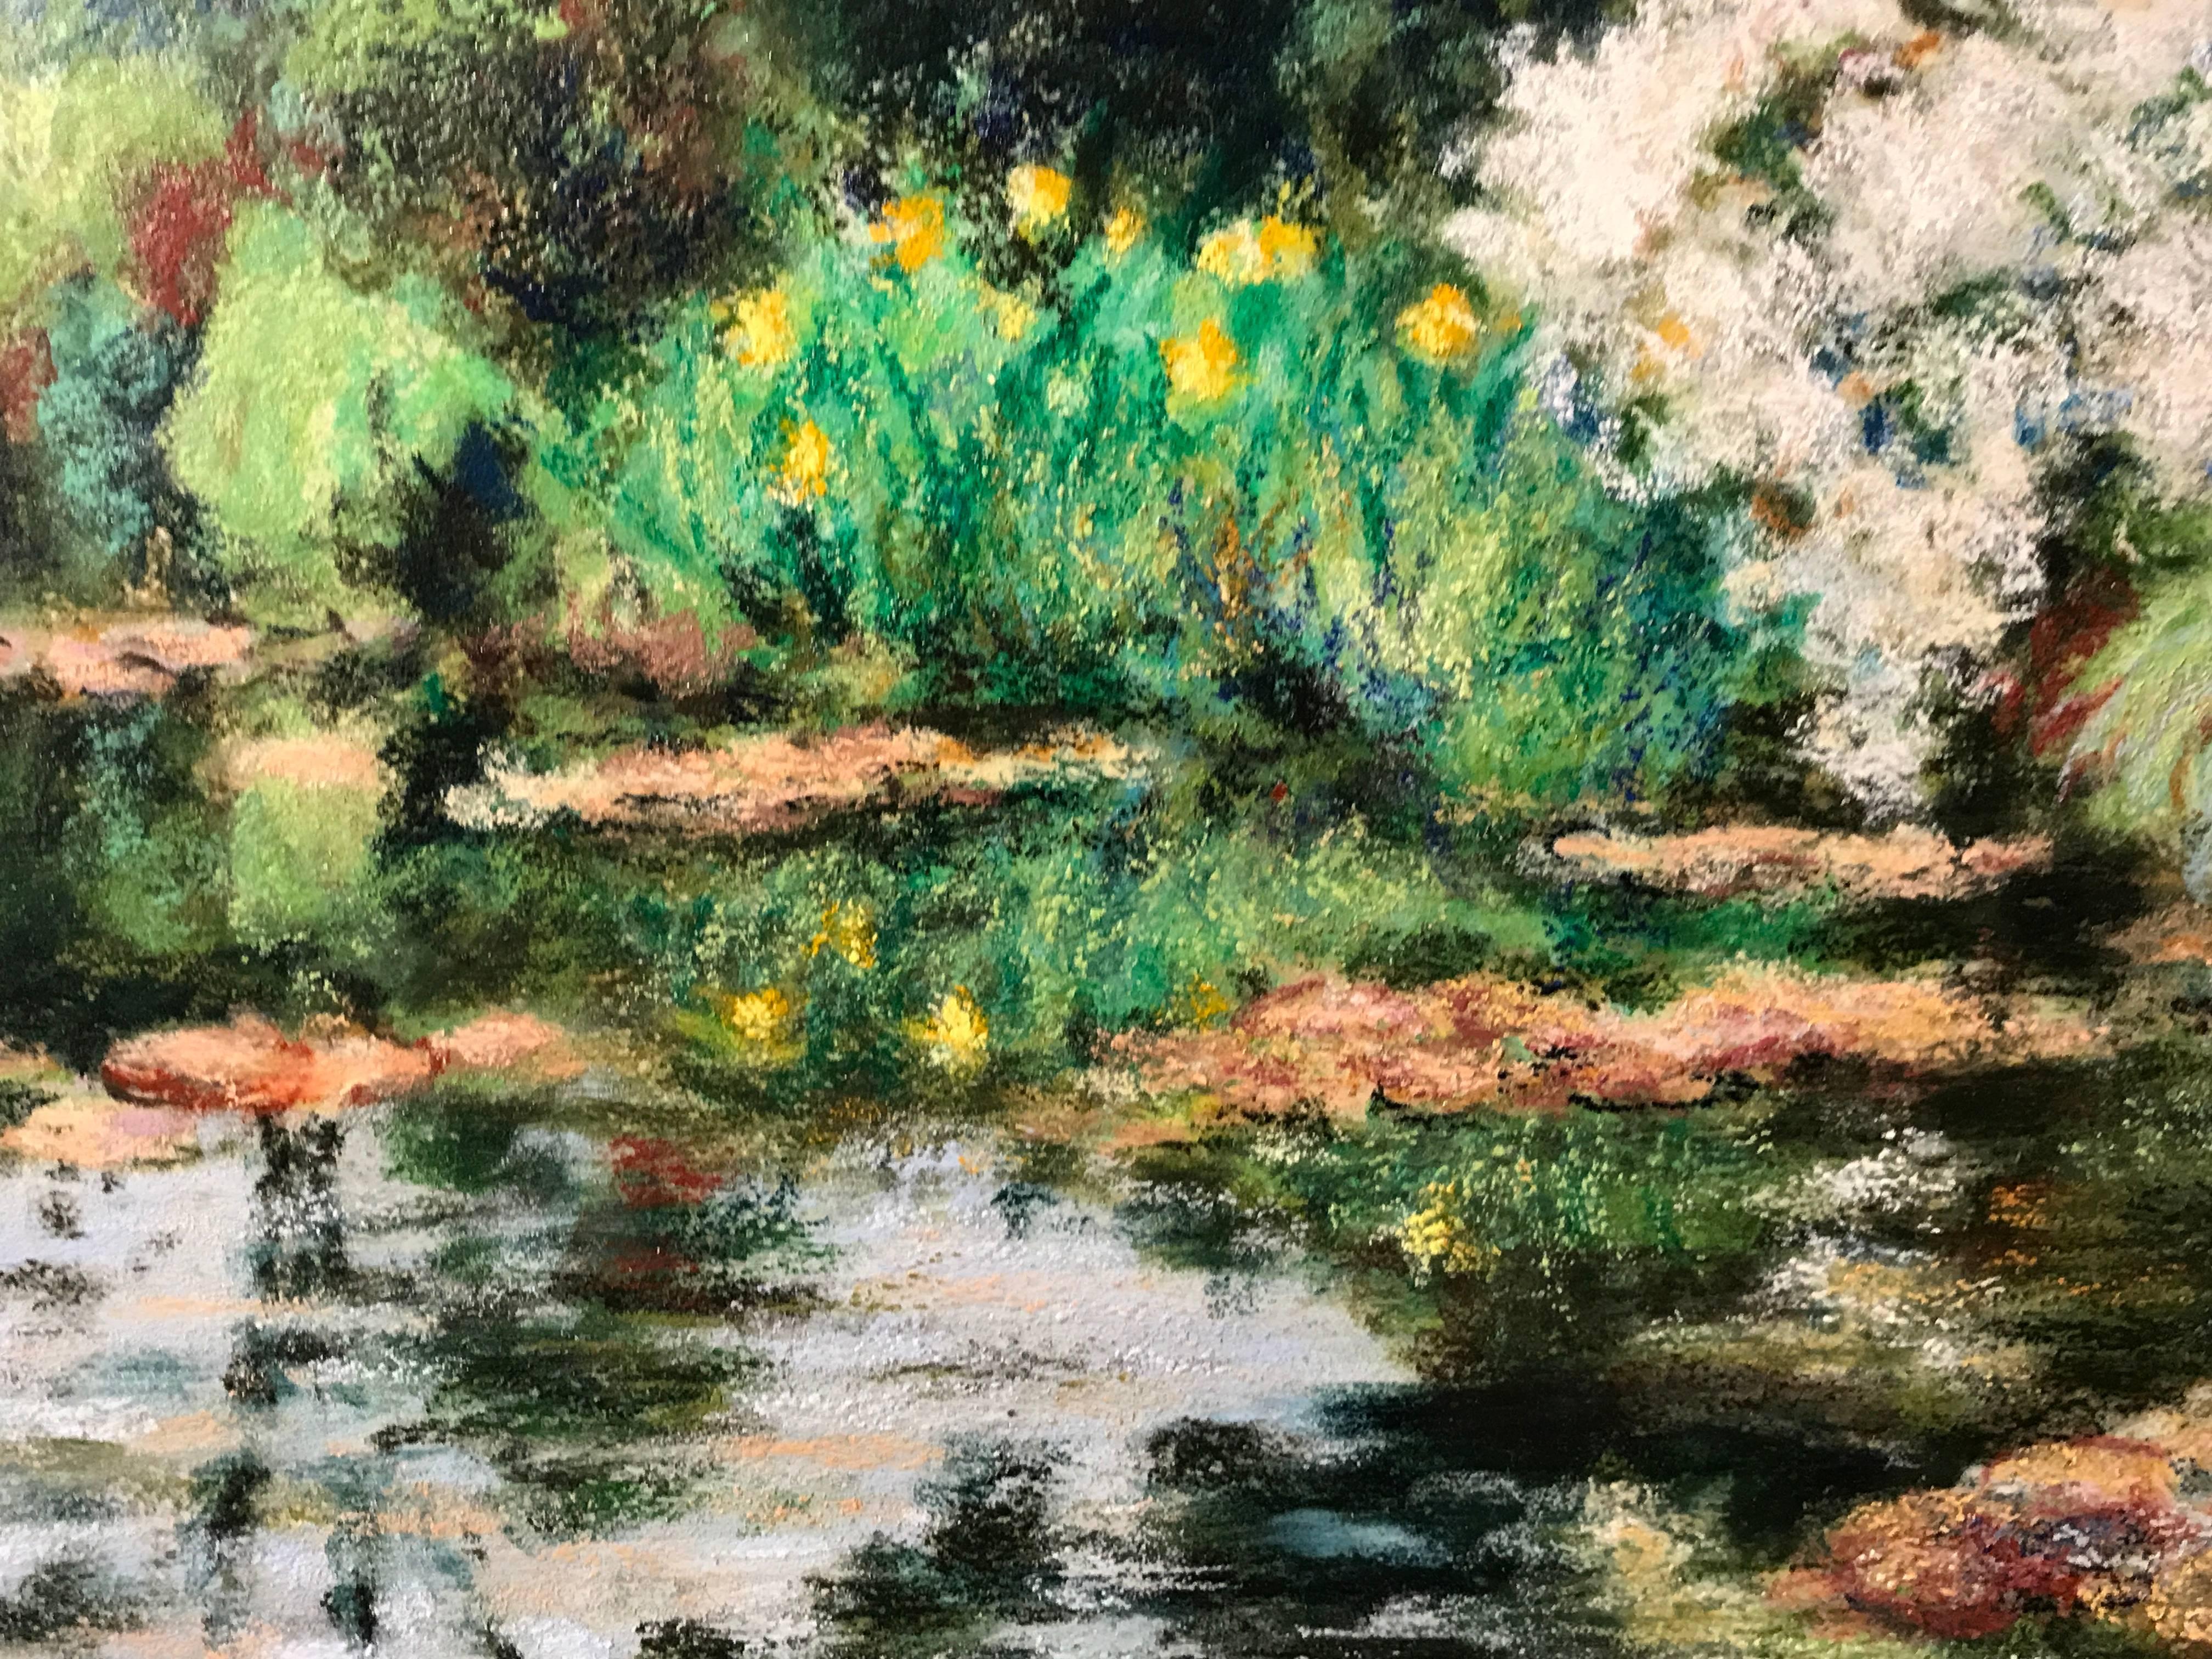 Monet's Waterlily Pond at Giverny 'L'ete a Giverny' - Impressionist Painting by Maria Bell-Salter